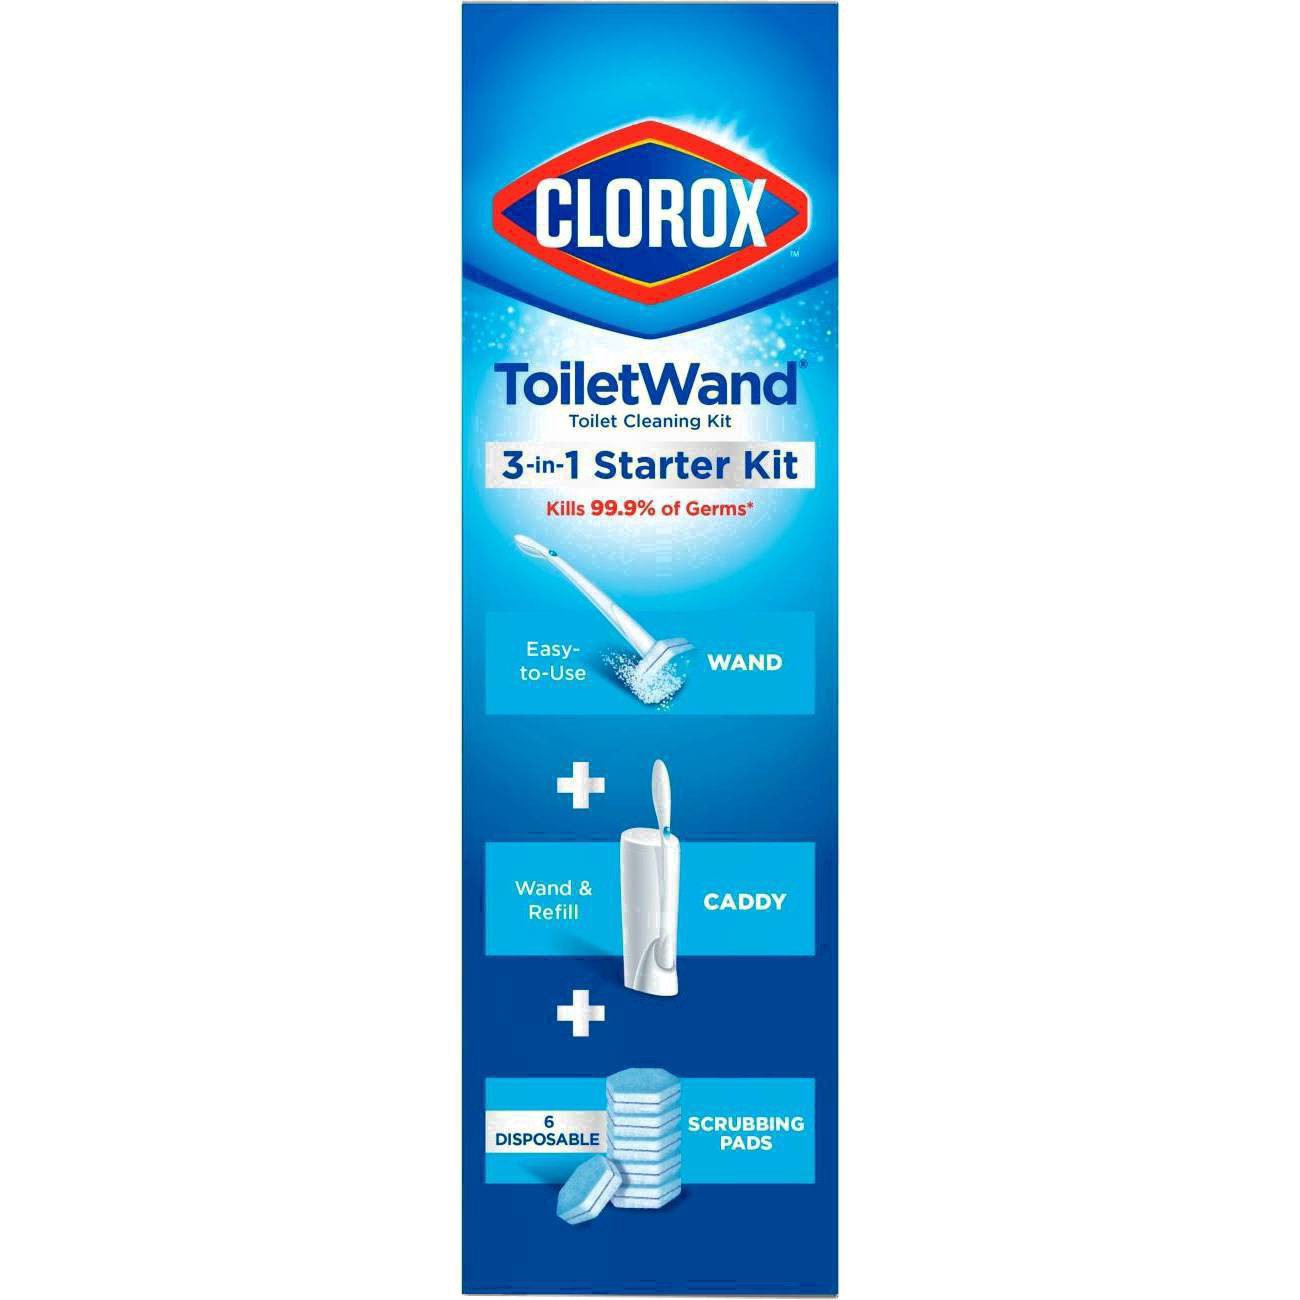 slide 156 of 176, Clorox Toilet Wand 3-in-1 Starter Toliet Cleaning Kit, 1 ct